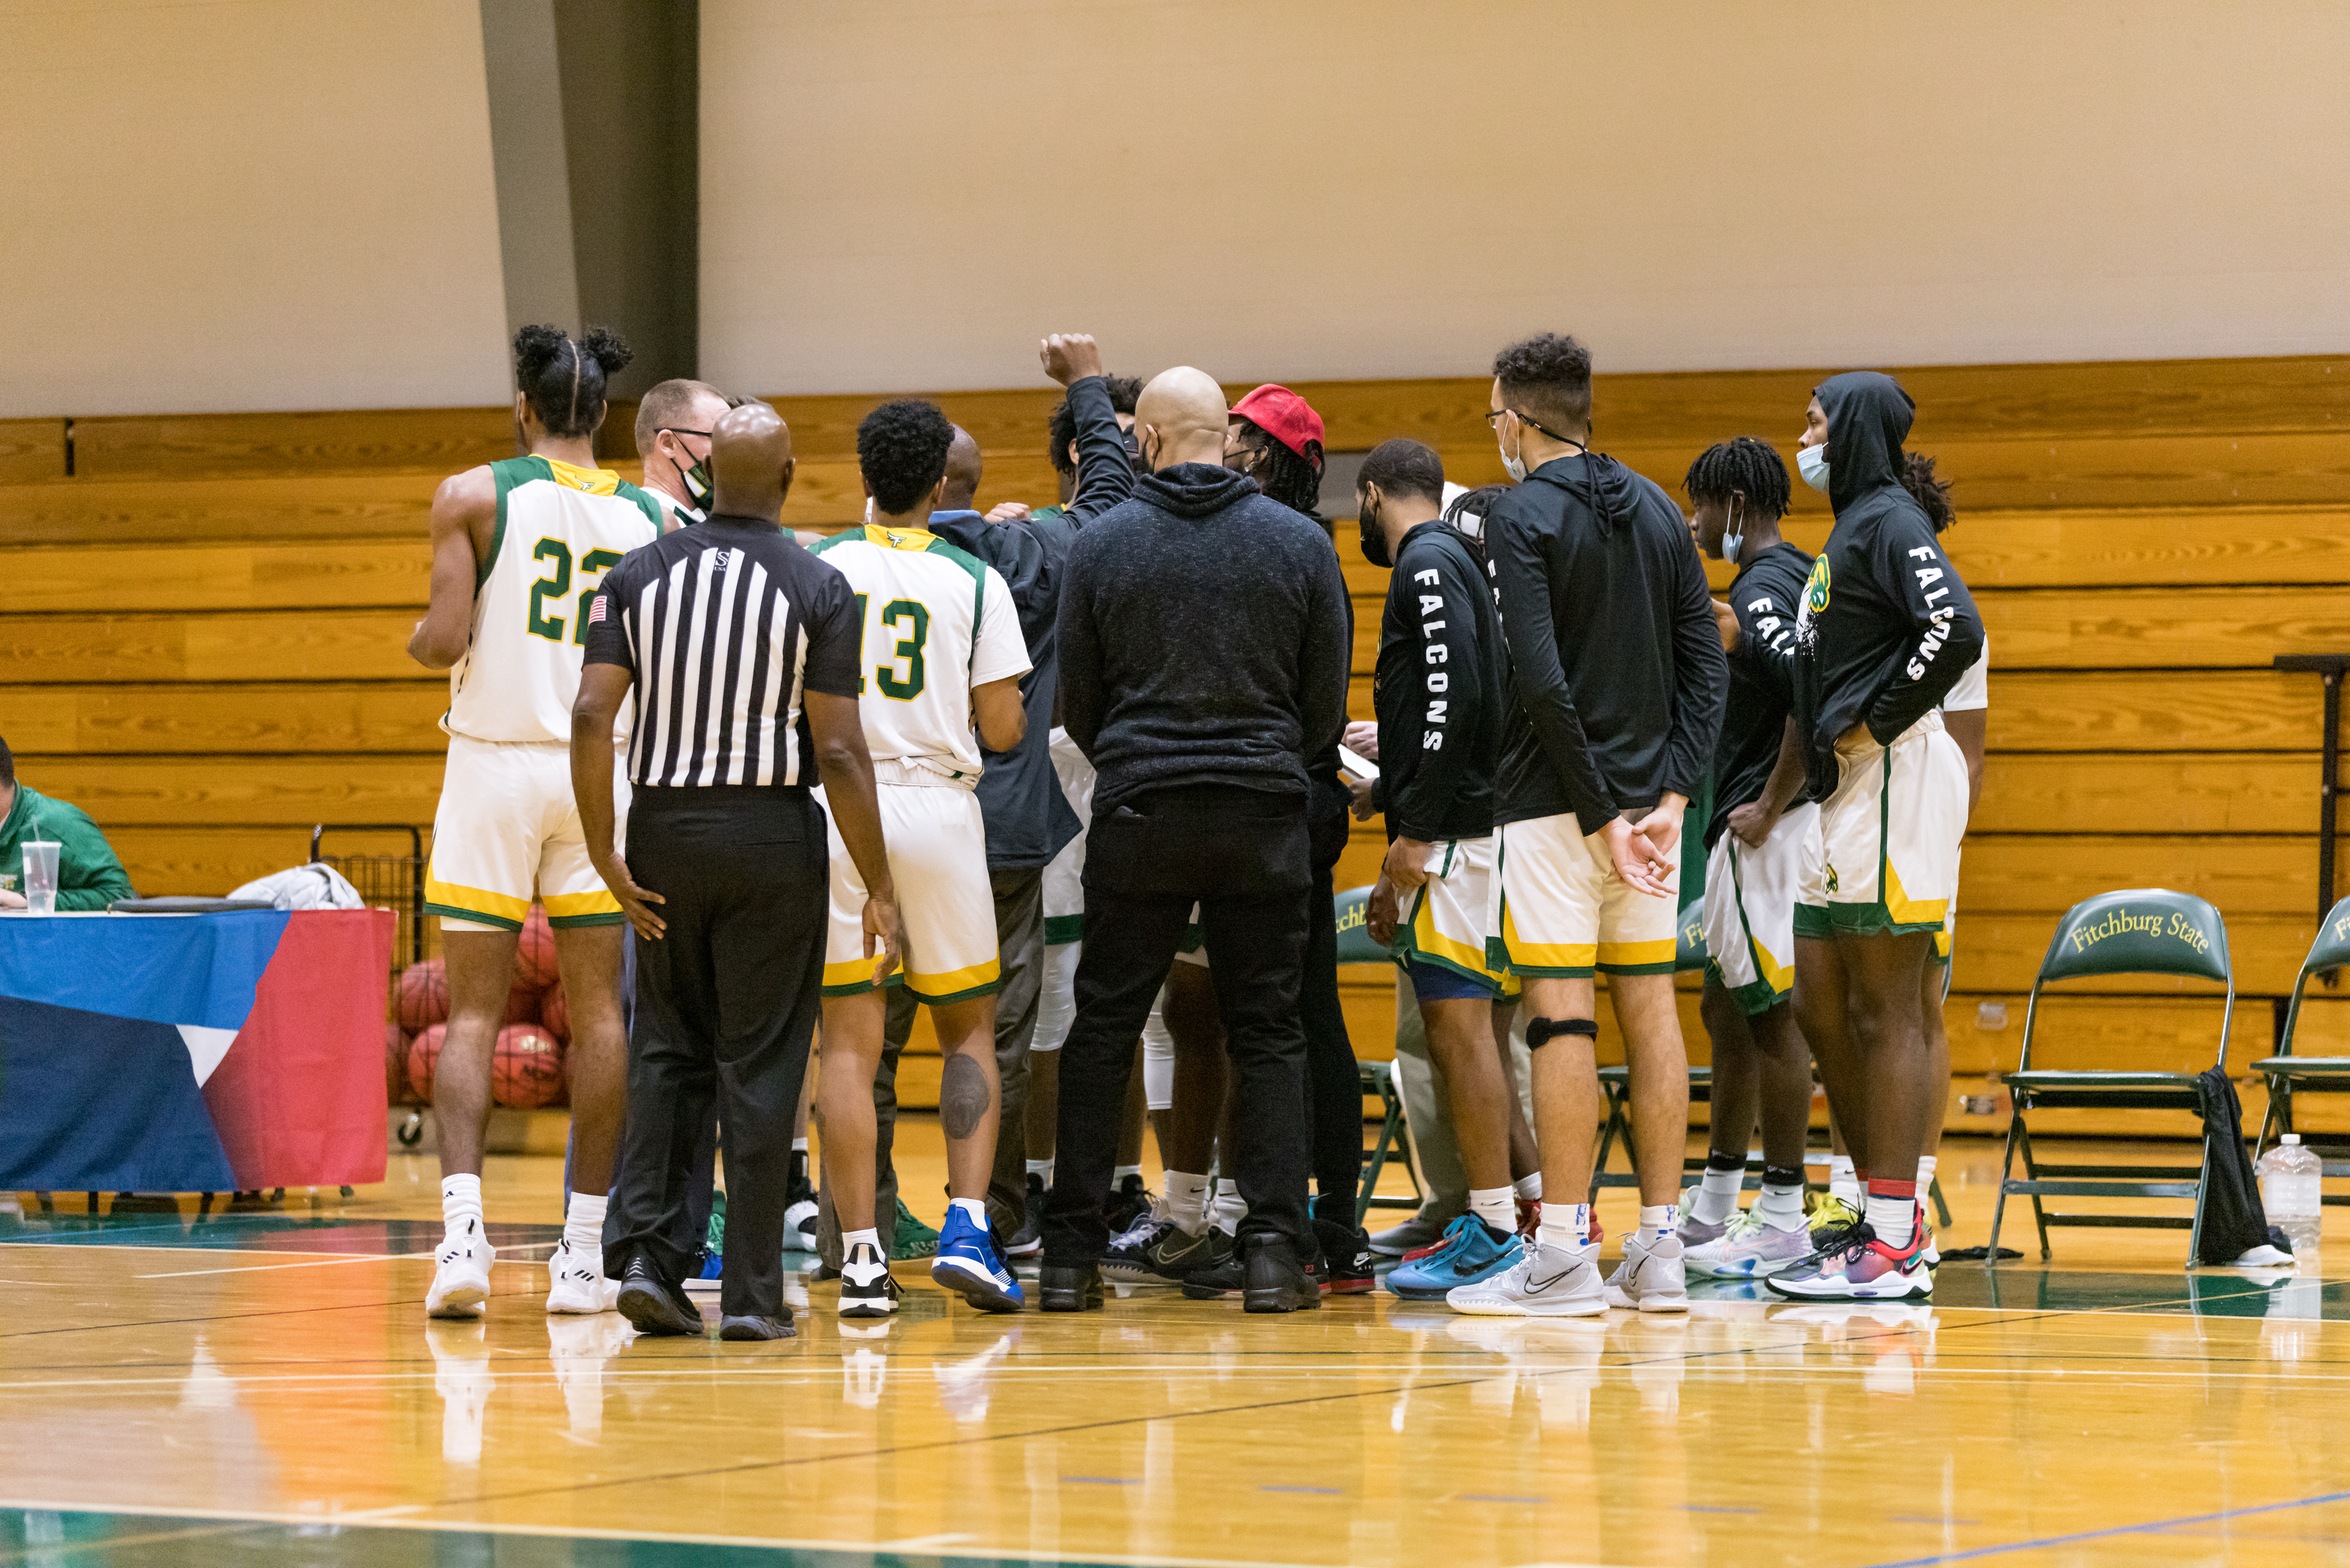 Fifth Seeded Falcons Upended By Top Seeded Owls In MASCAC Semifinals